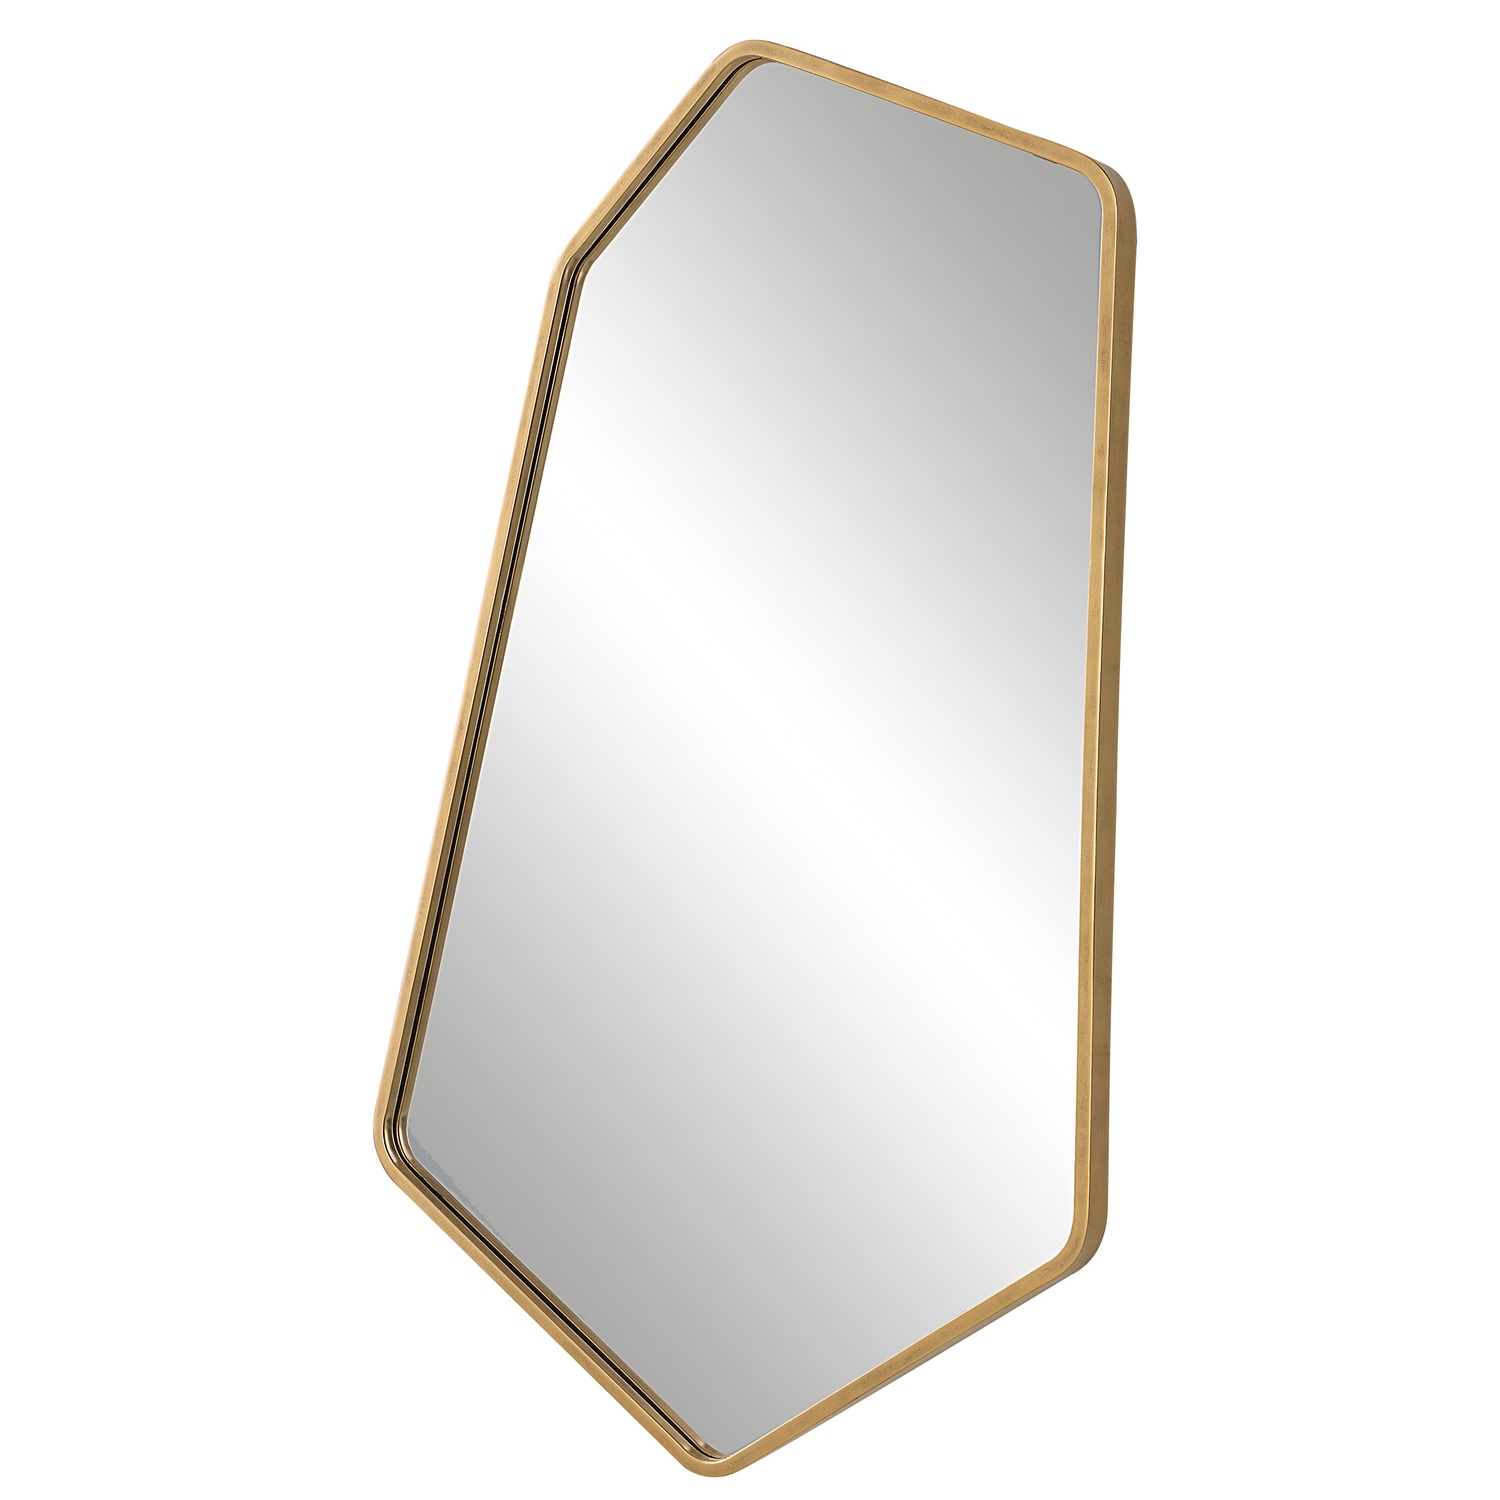 Linneah-Large Gold Mirror